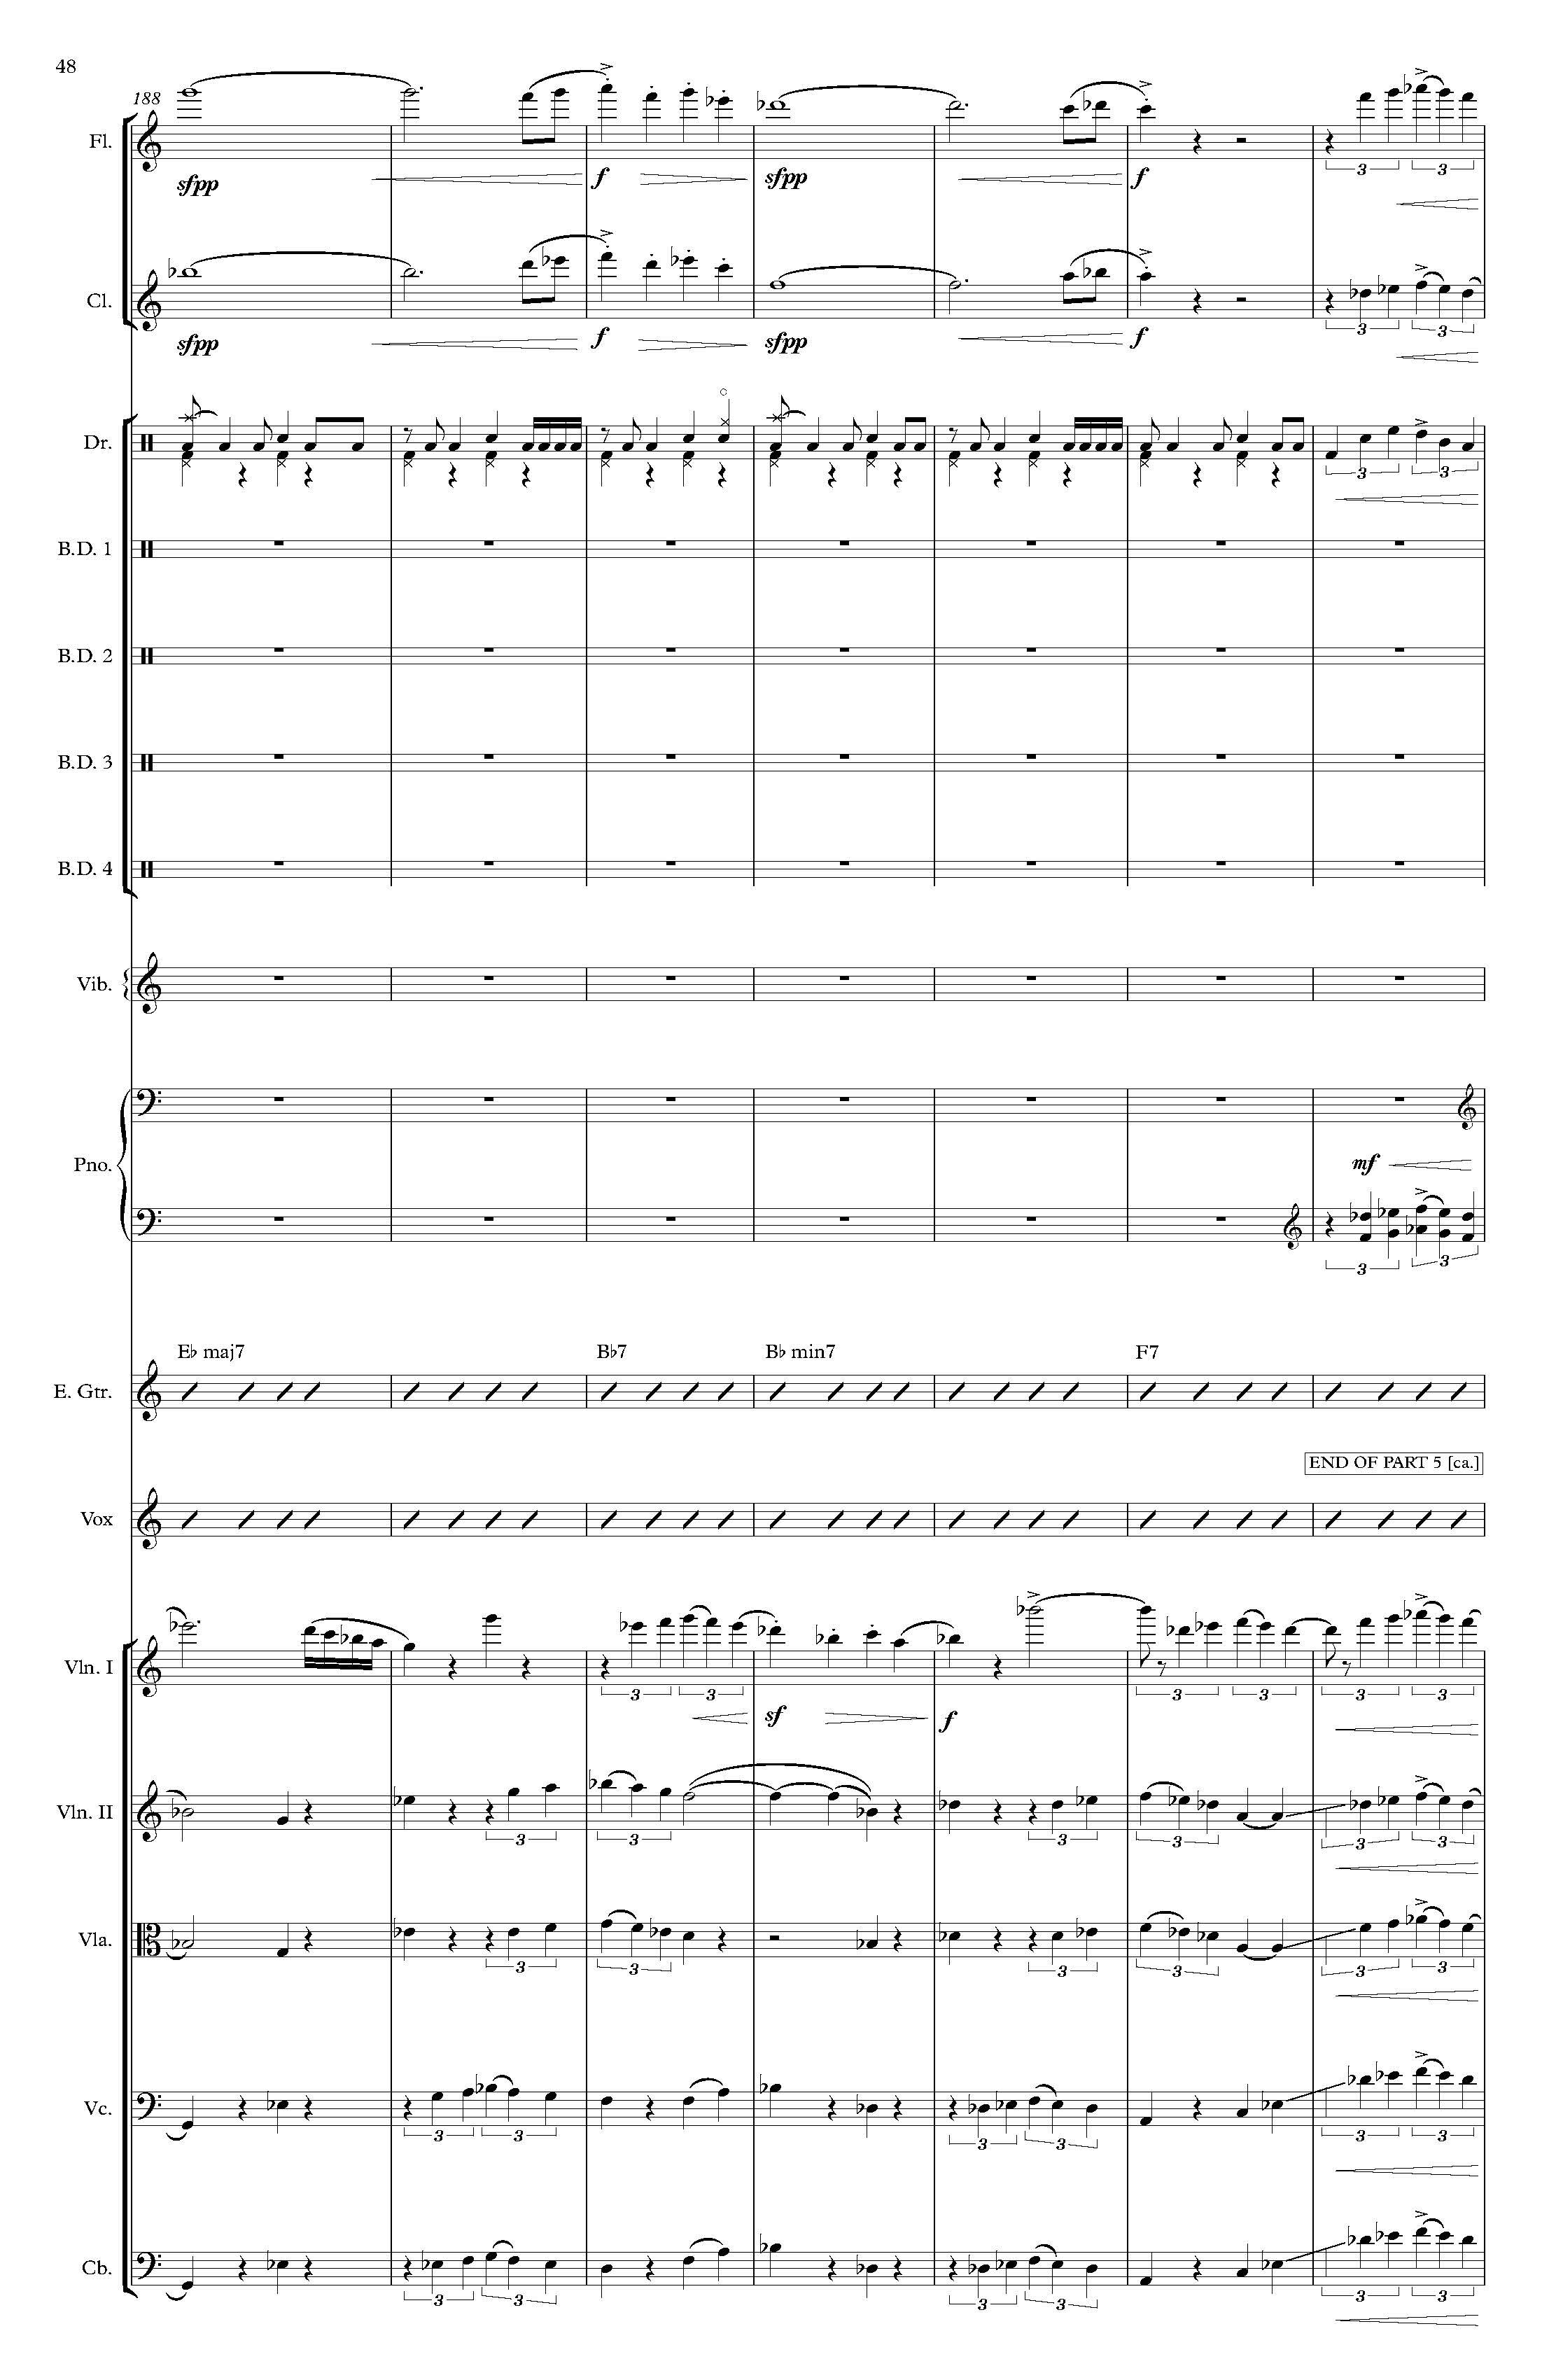 The Rembrandt of Avenue A - Complete Score_Page_54.jpg